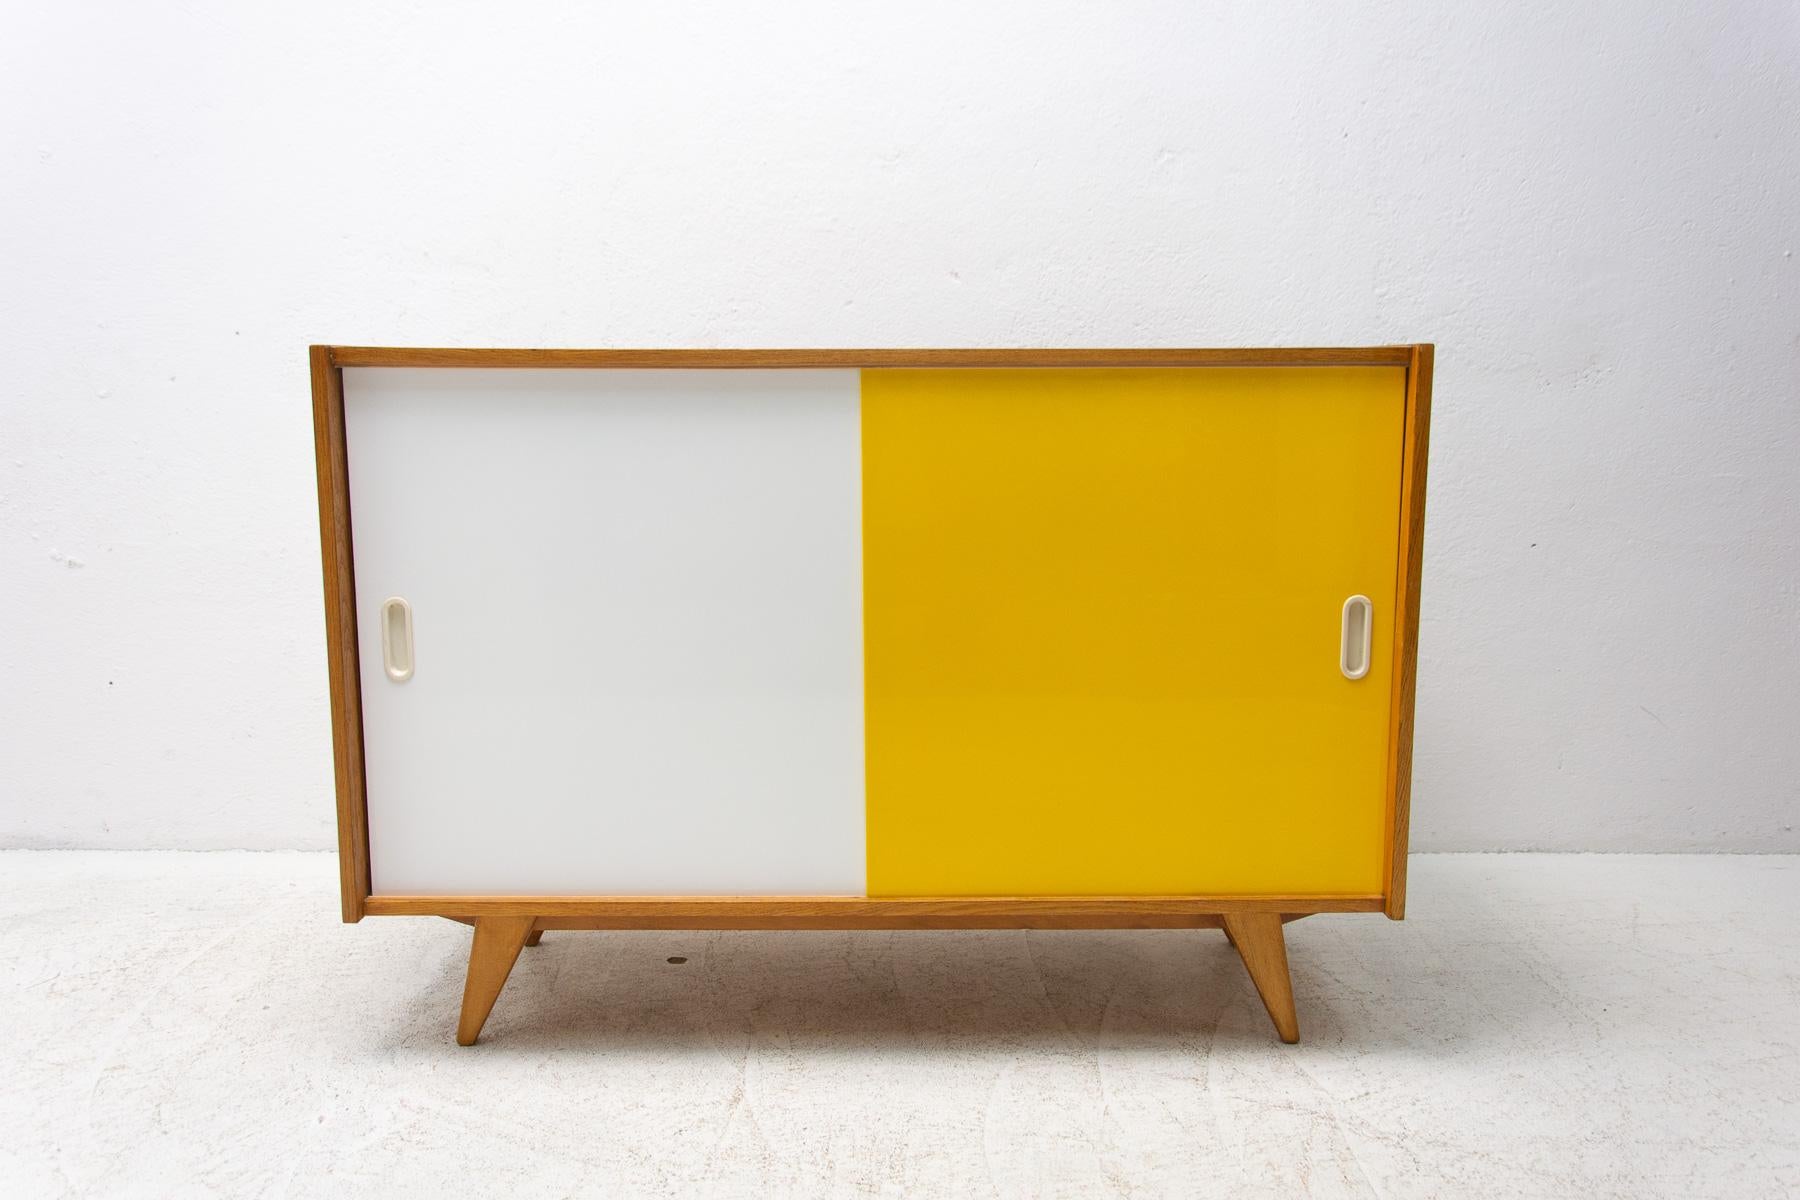 Midcentury sideboard-cabinet with sliding doors, catalogue No. U-452, designed by Jiri Jiroutek. It's made of beechwood, veneer, plywood and laminate. In excellent condition, fully refurbished.

The cabinet comes from the famous Universal series